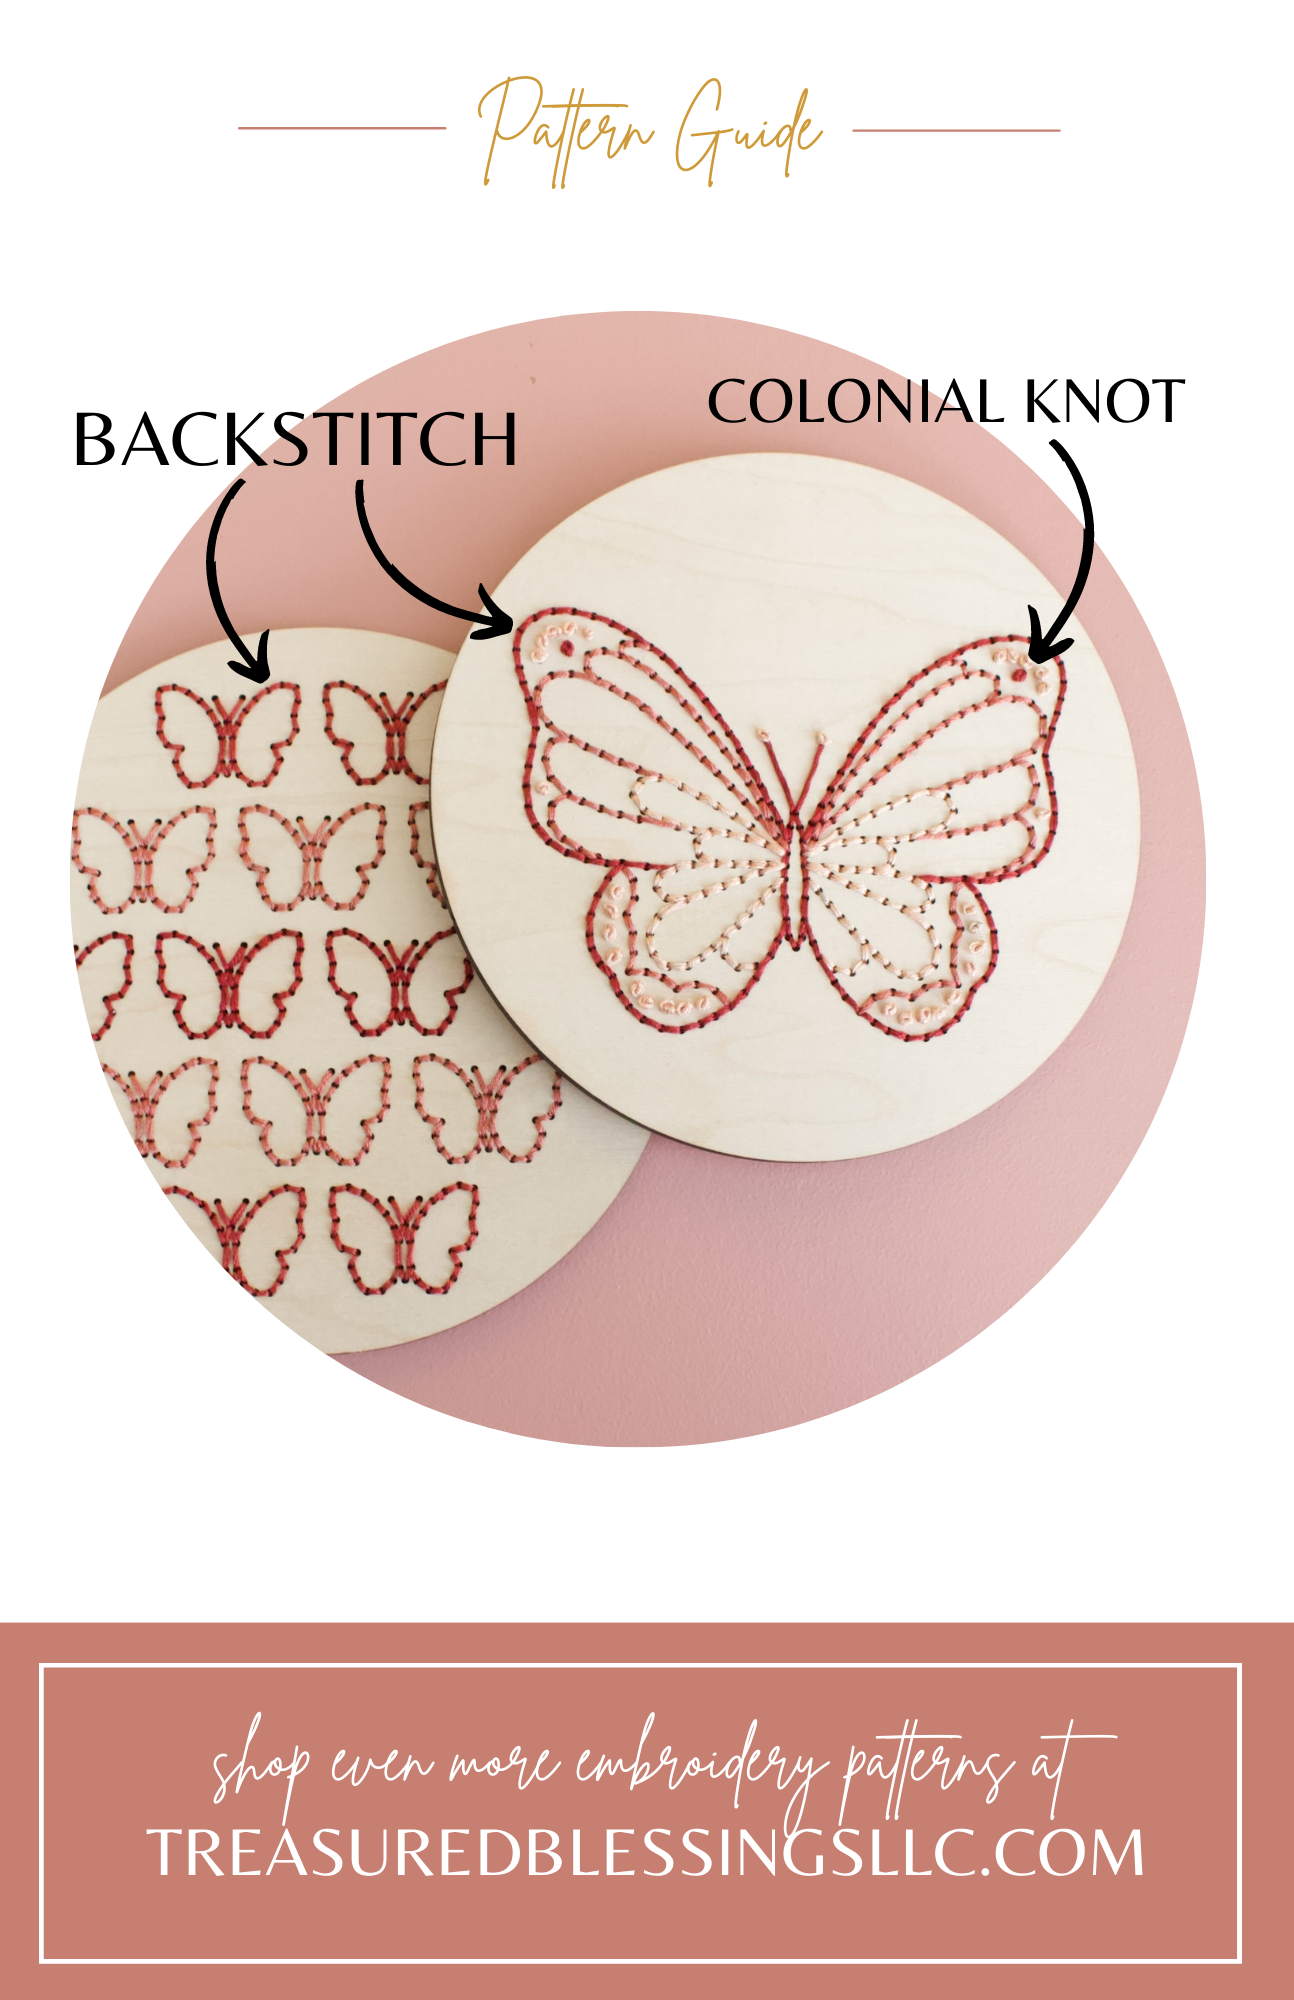 Wood Embroidery Kit - Butterfly